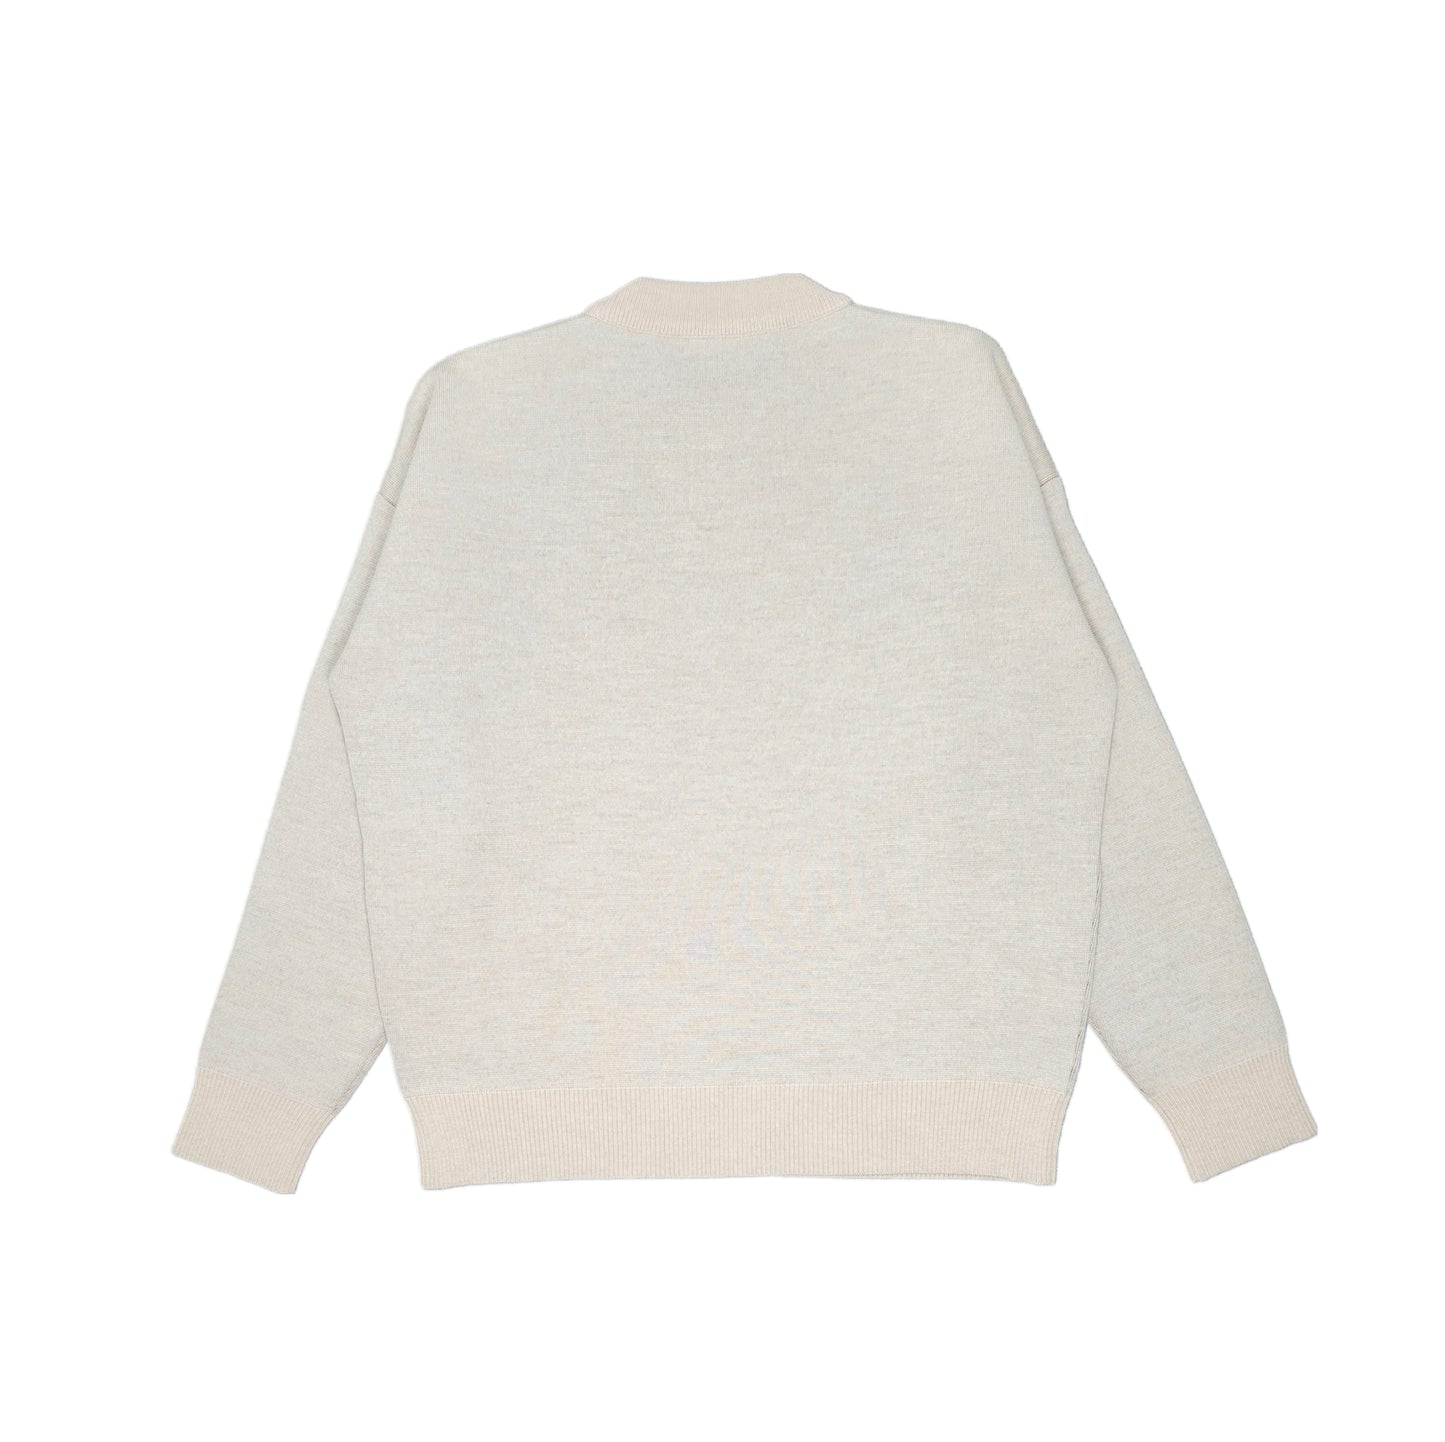 BEIGE BROWN TOUR GUIDES SWEATER